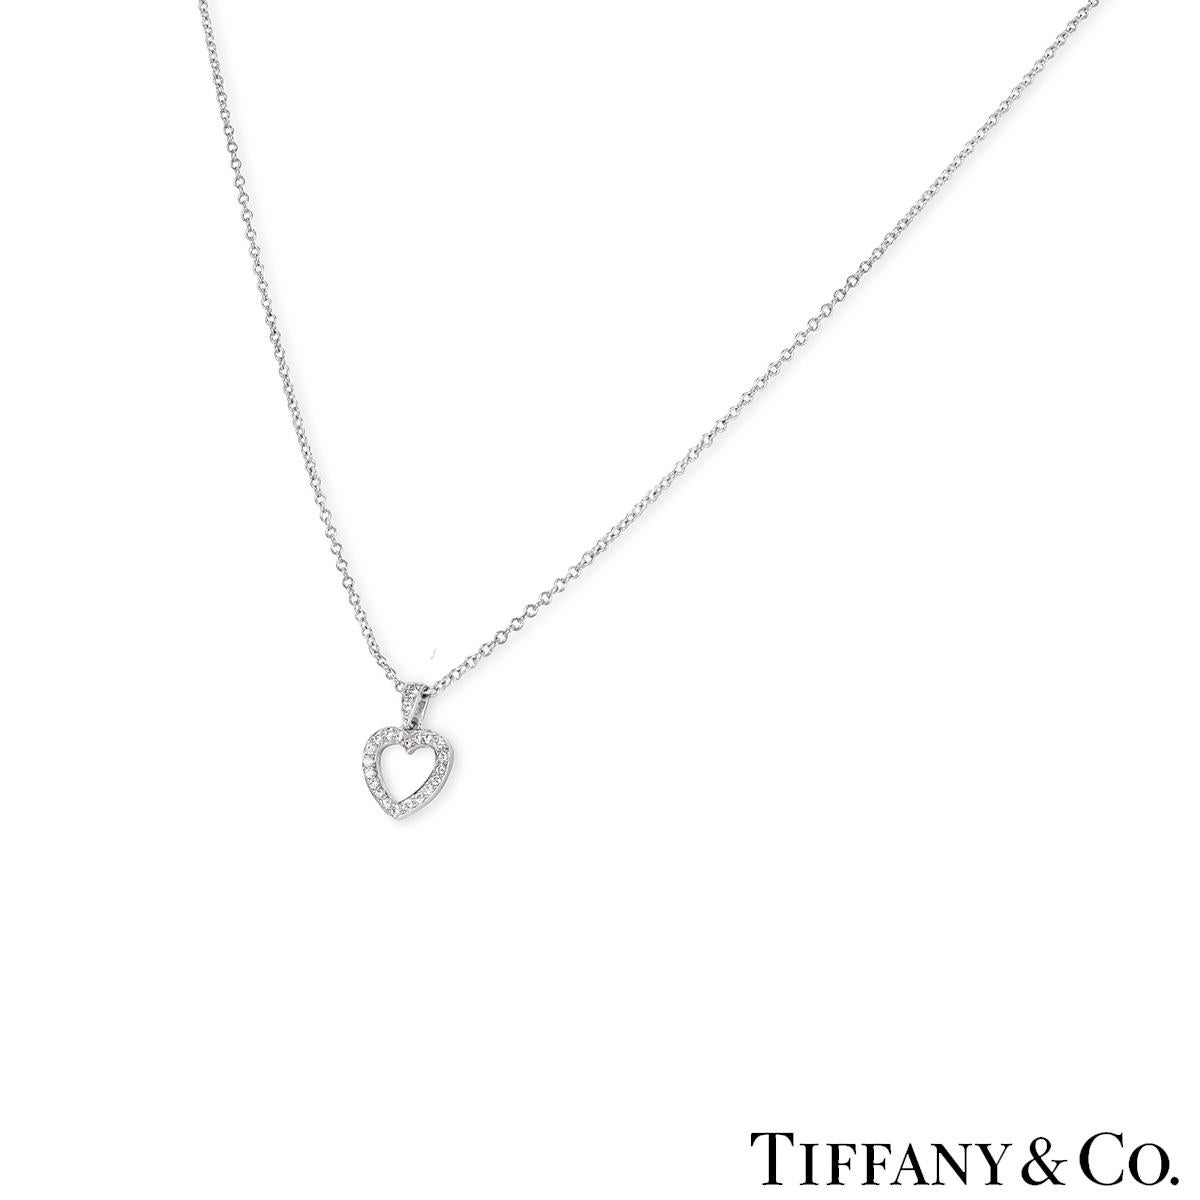 A lovely platinum diamond heart pendant by Tiffany & Co. The pendant features an open heart motif pave set with 22 round brilliant cut diamonds. The diamonds have an approximate total weight of 0.13ct, F-G colour and VS clarity. The pendant measures